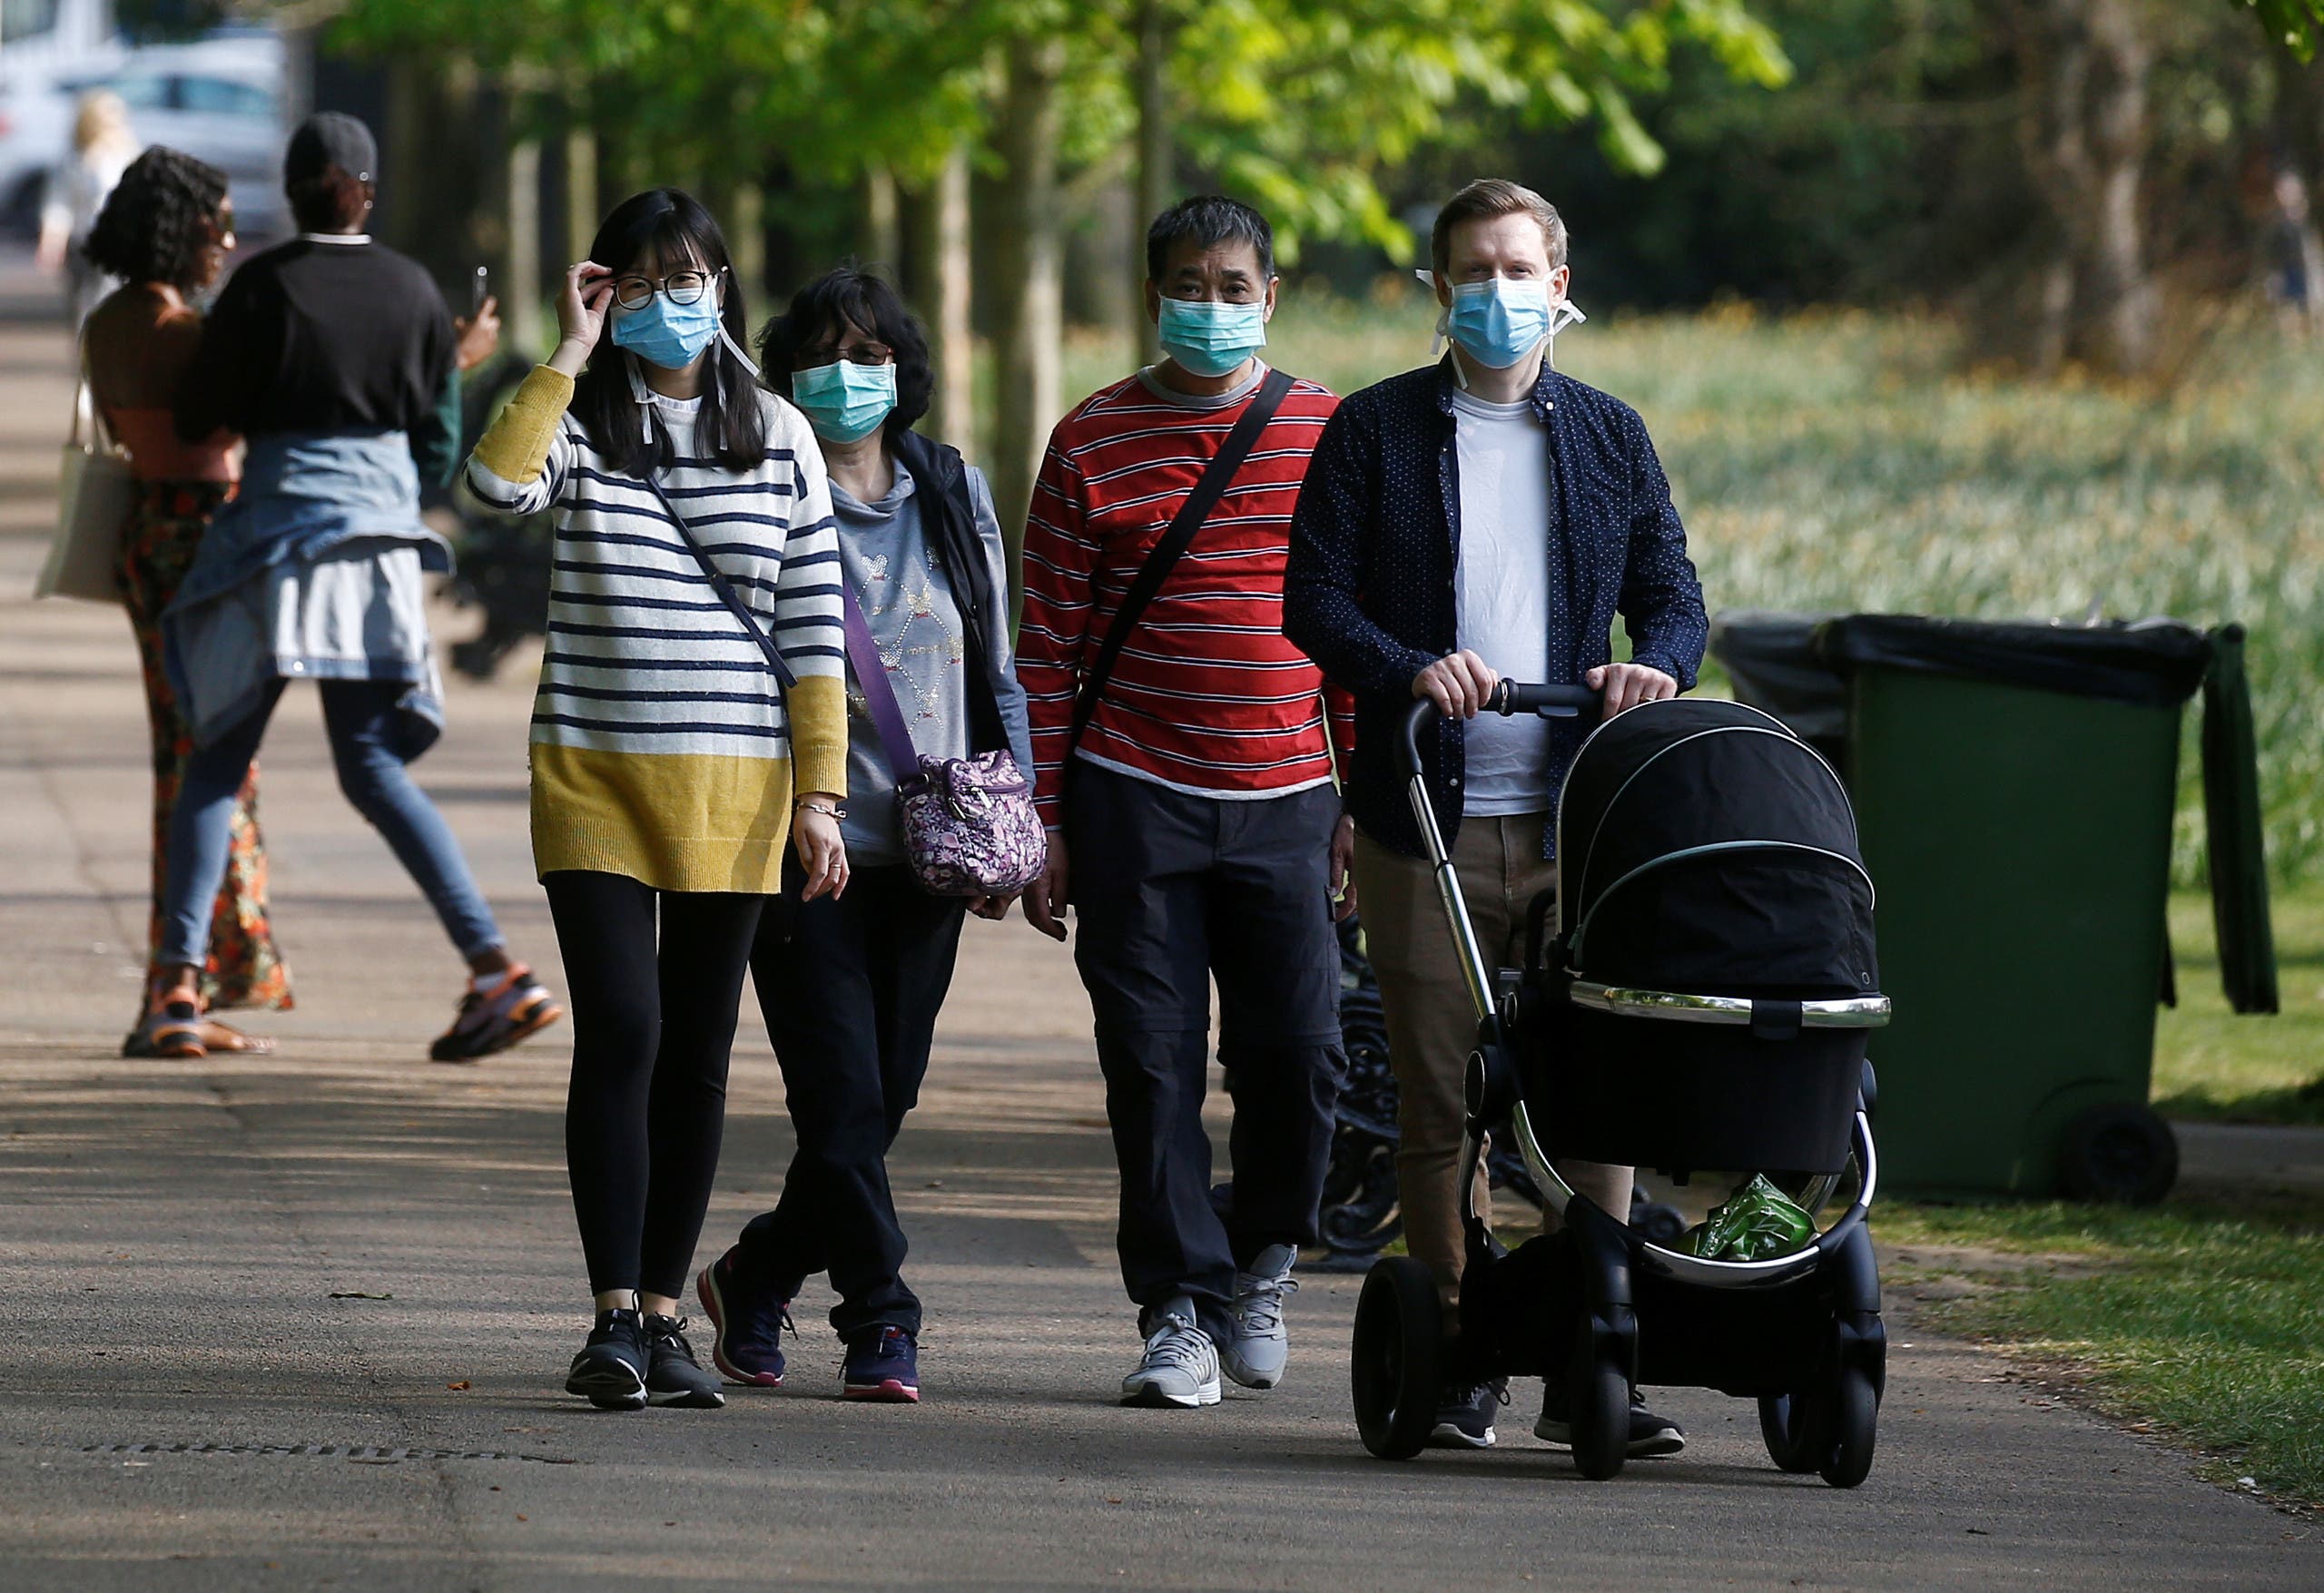 People are seen wearing protective face masks in Greenwich Park as the spread of the coronavirus disease (COVID-19) continues, London, Britain, April 11, 2020. (Reuters)